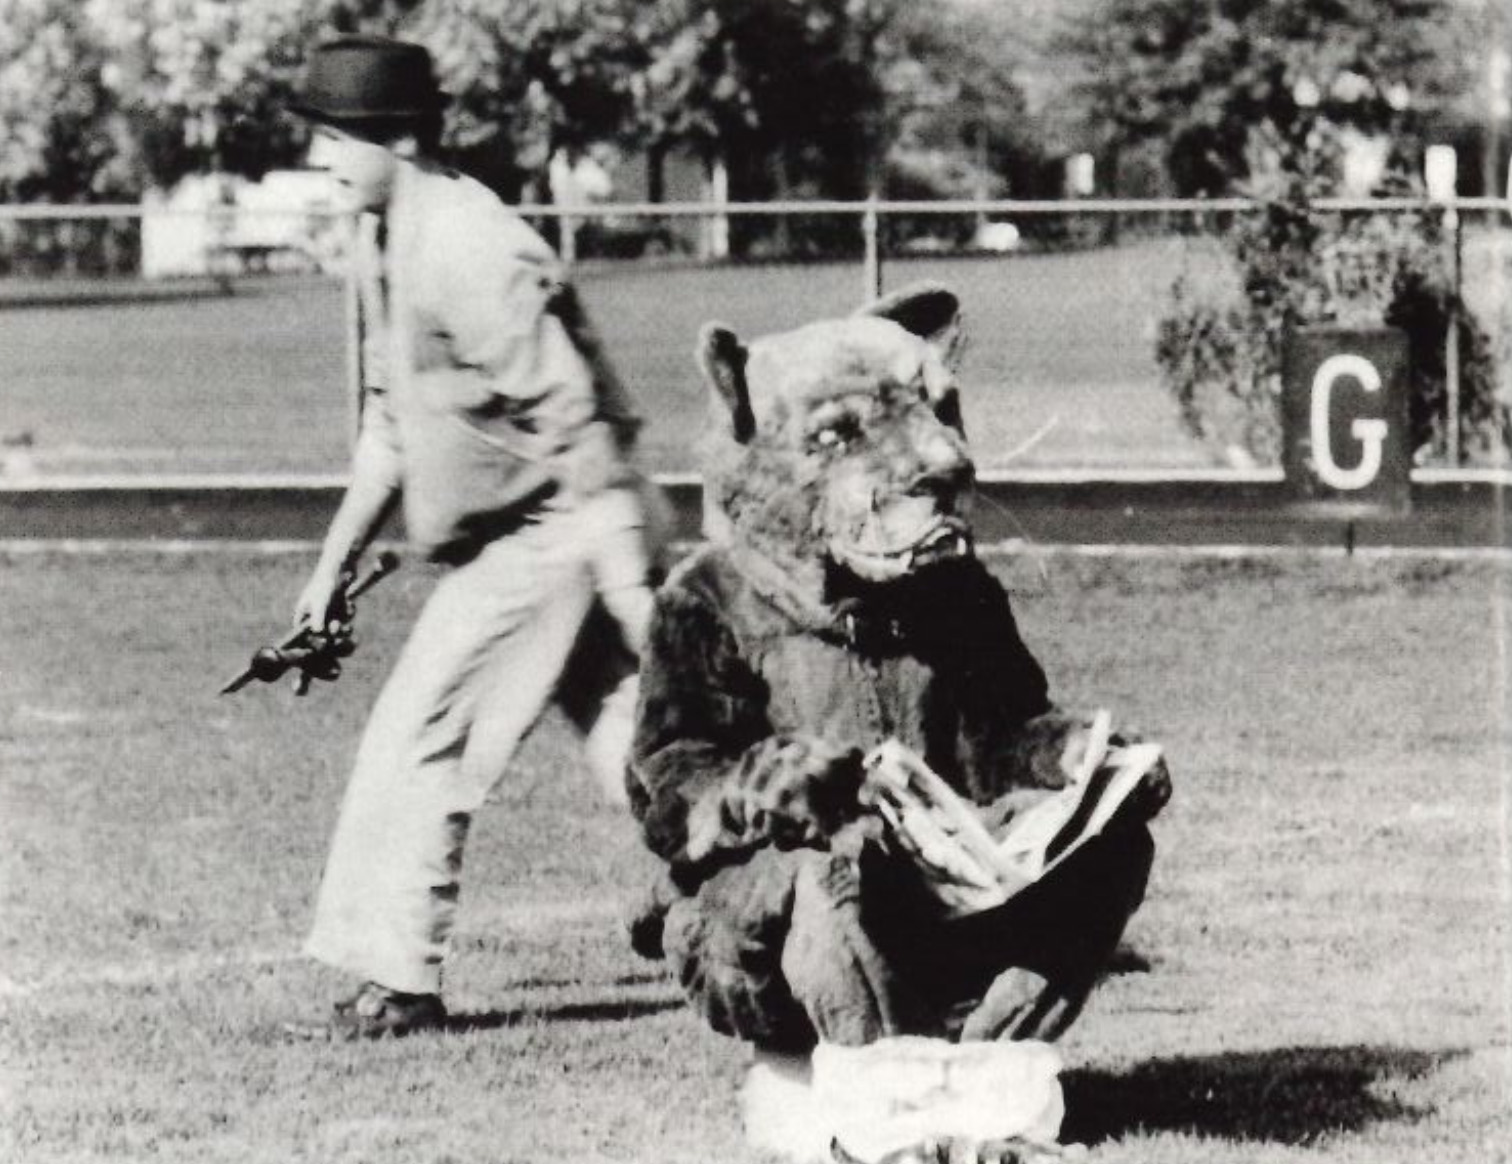 black and white photo of the Nittany Lion being pulled off the field in a stunt during the 1940s